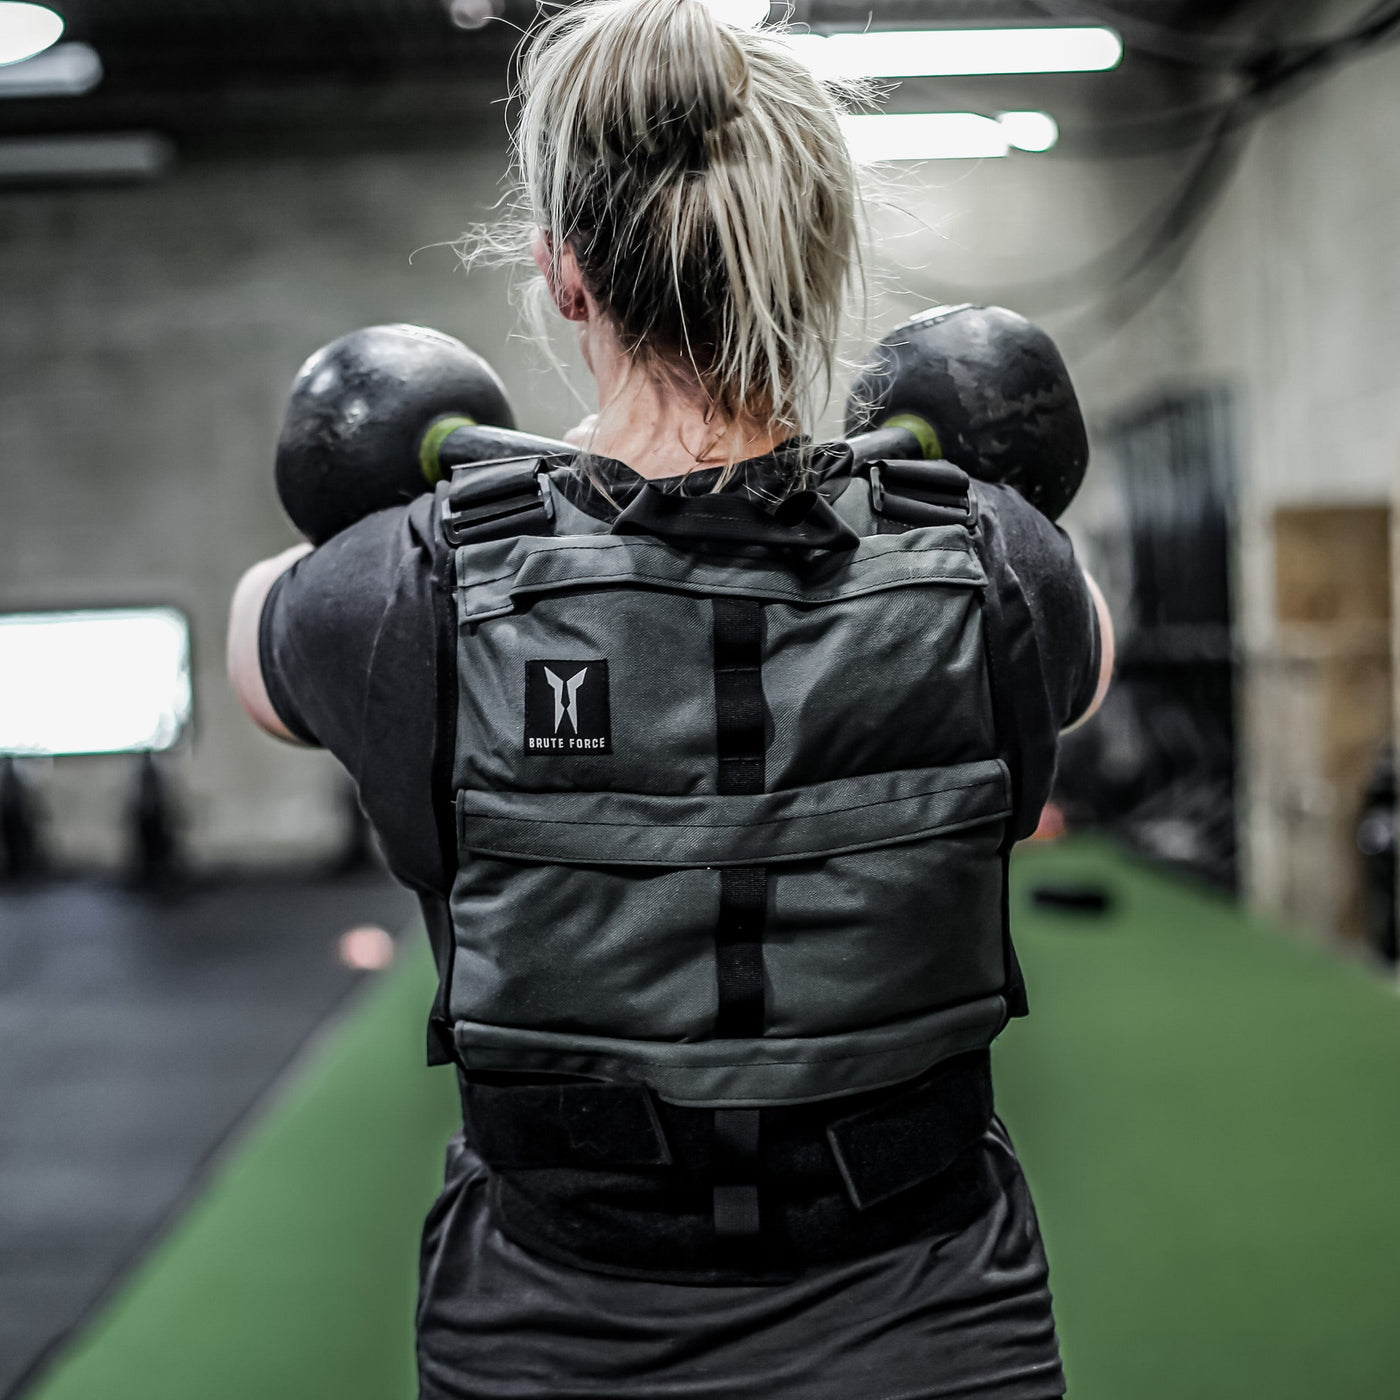 Brute Force Weighted Vest | Kettlebells